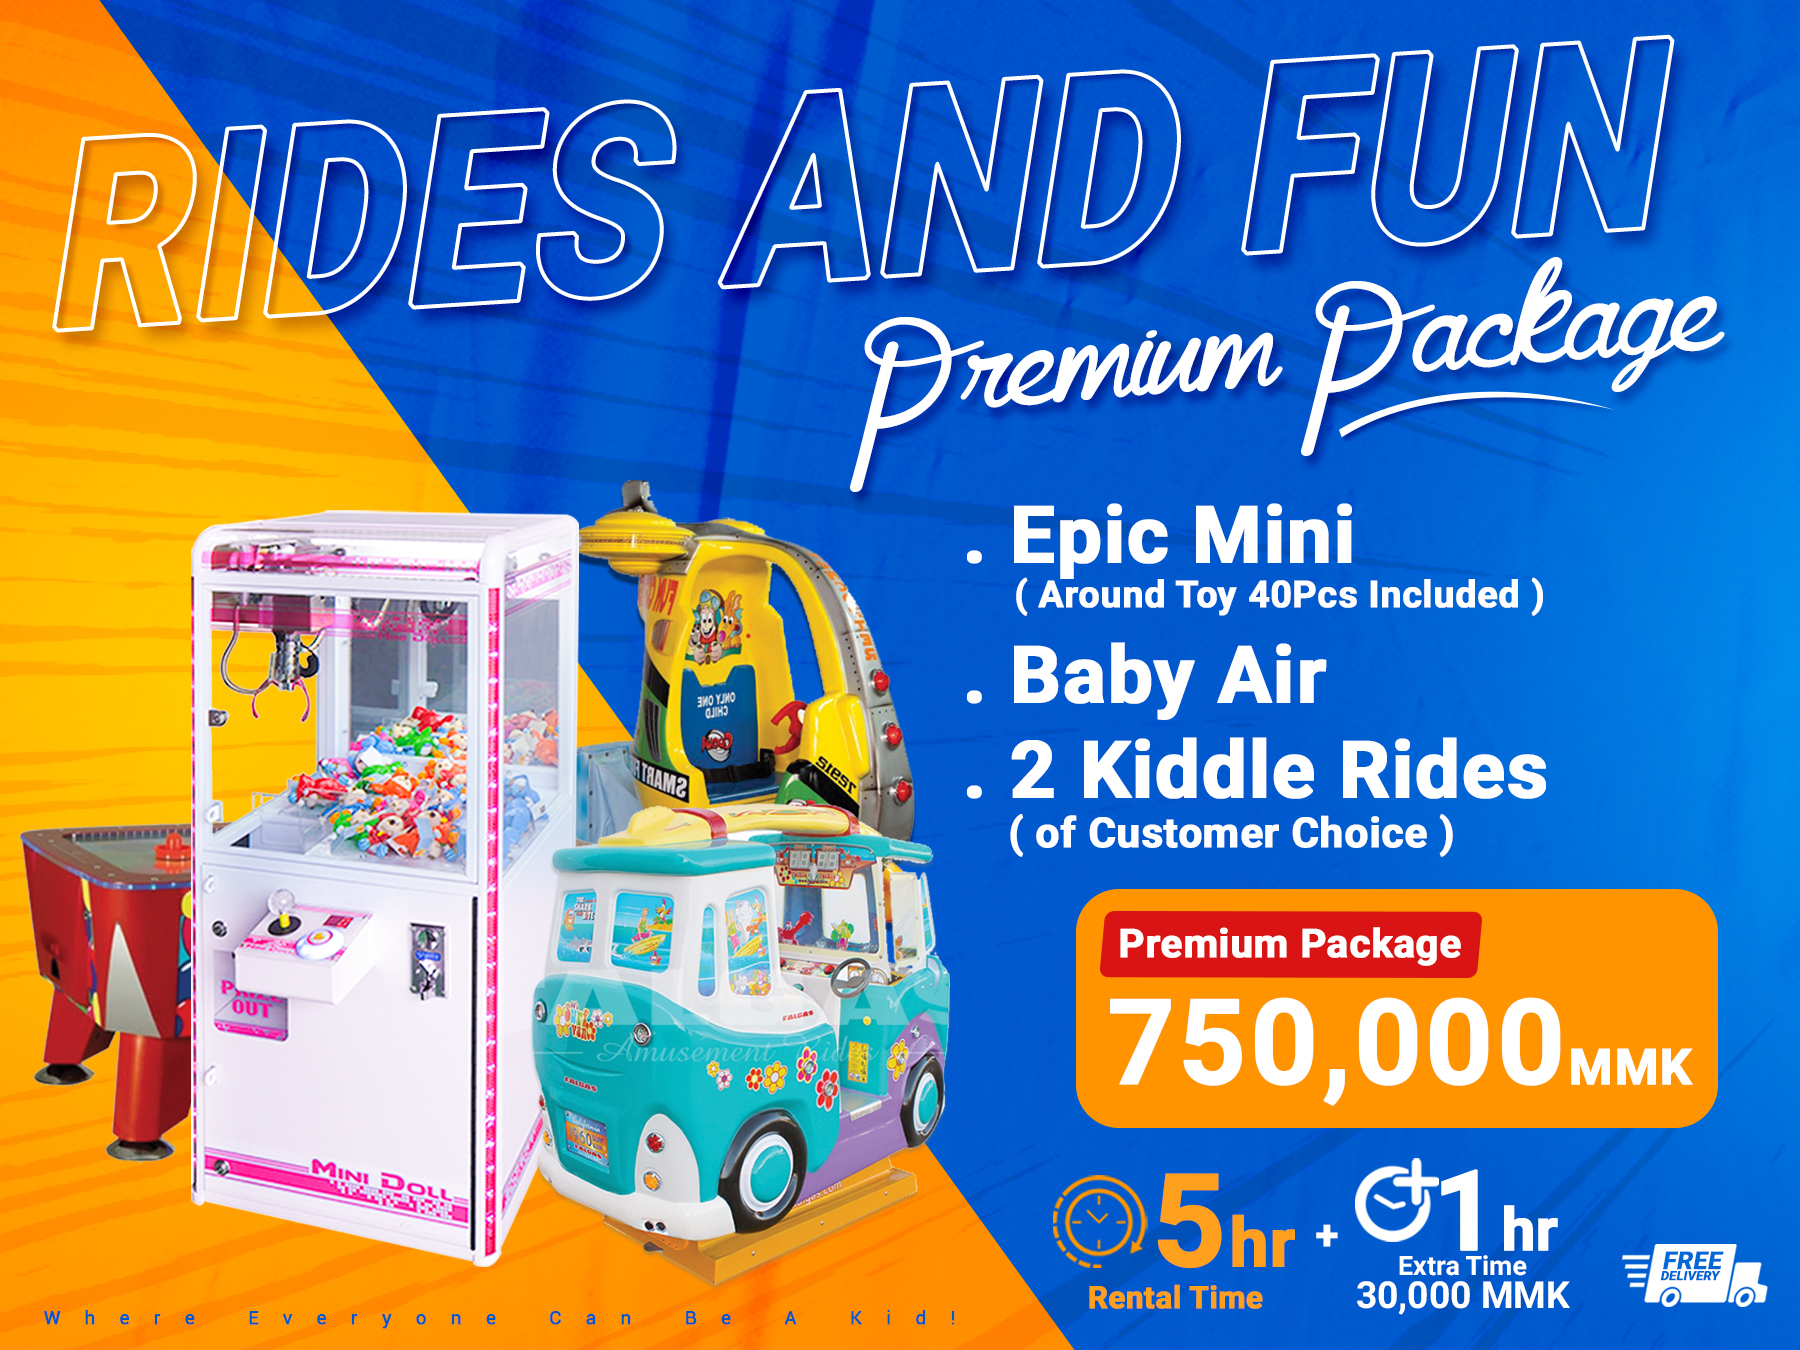 Rides and Fun Package (Premium)